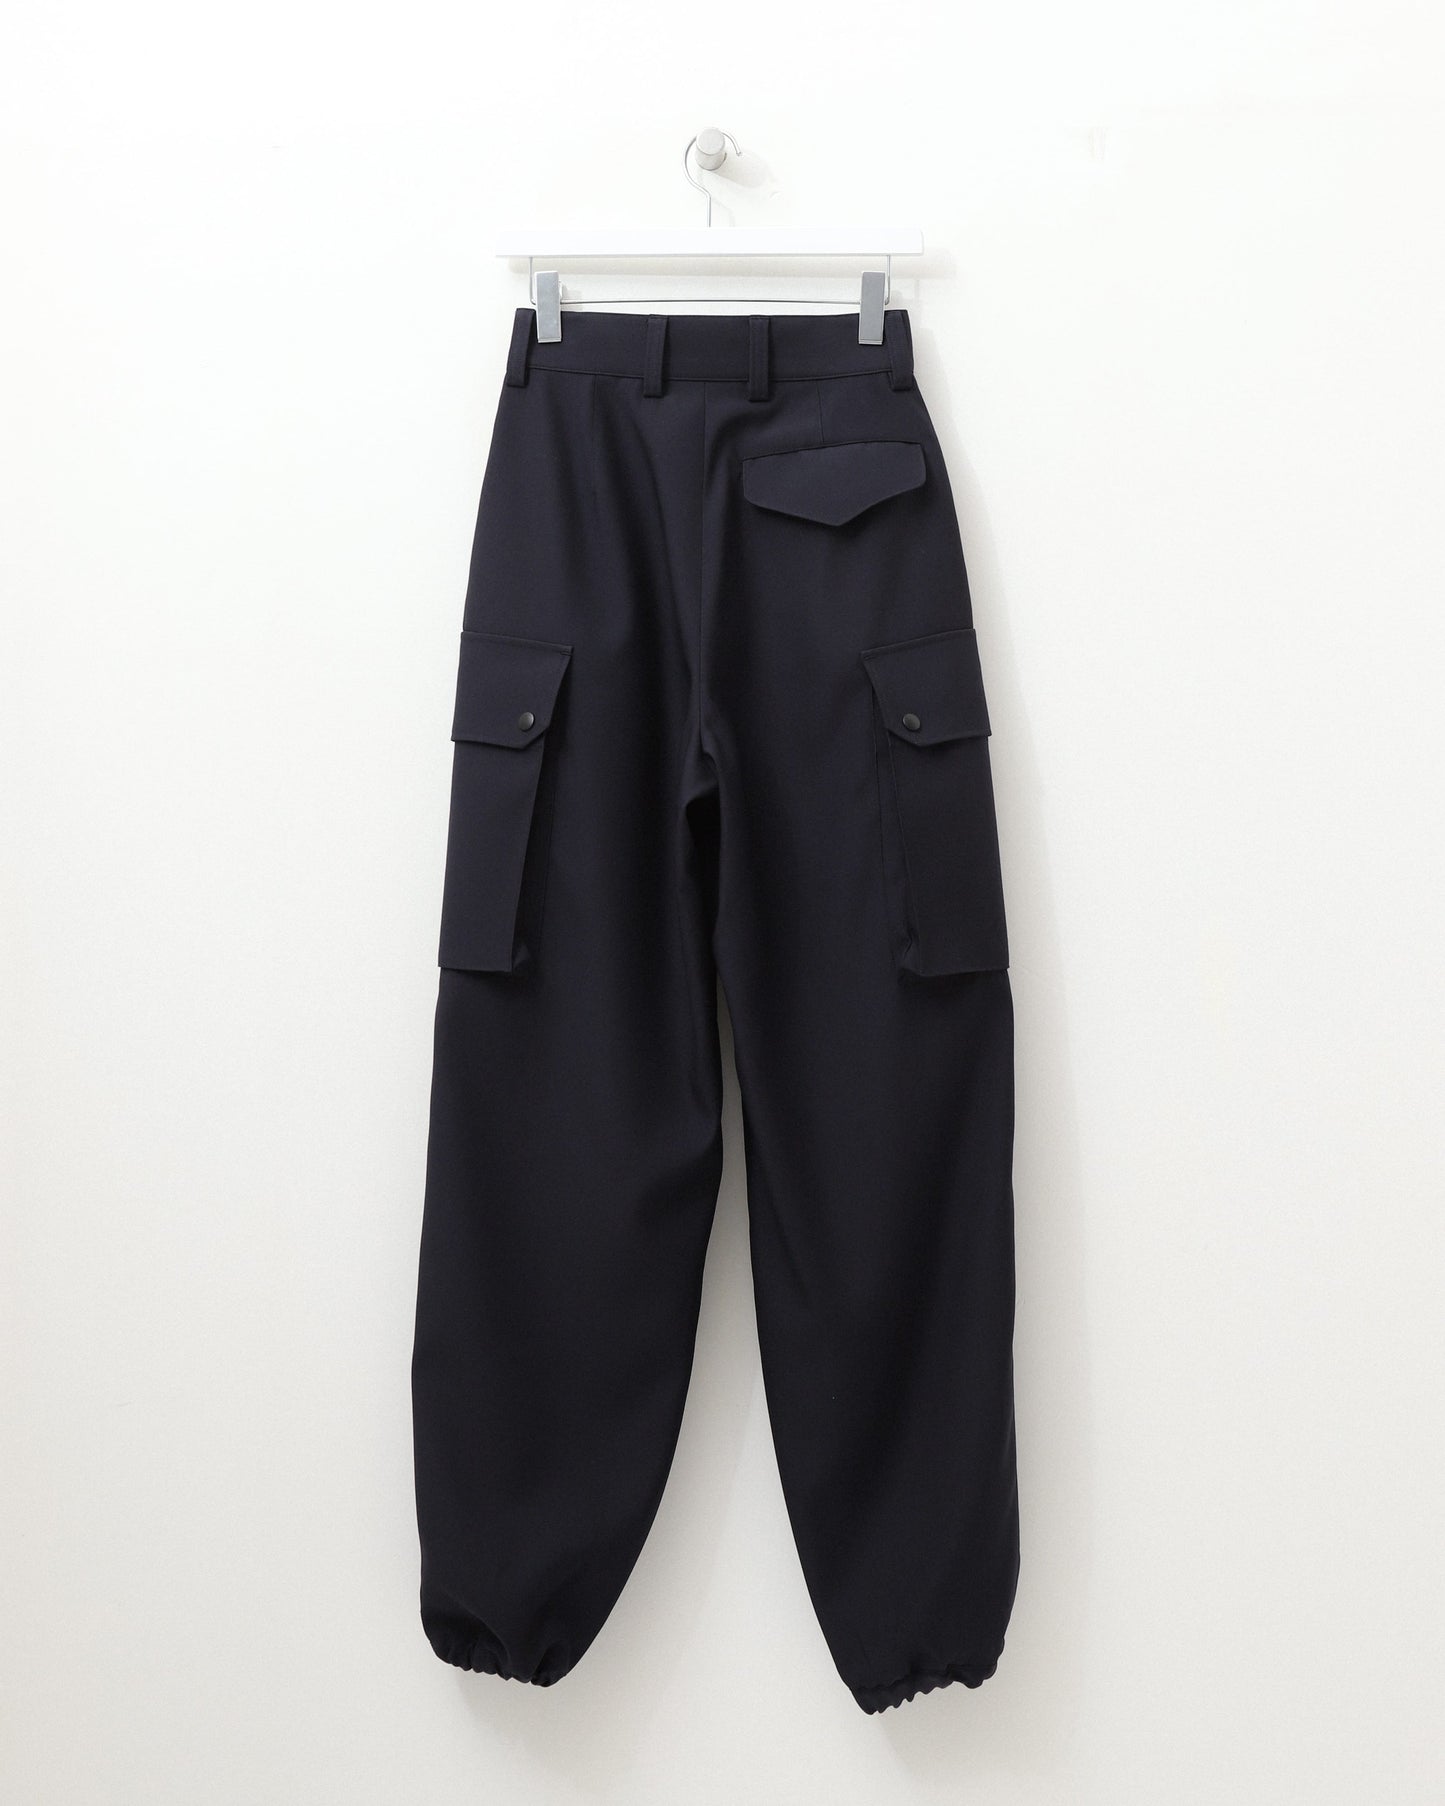 RERACS FRENCH ARMY F2 CARGO PANTS